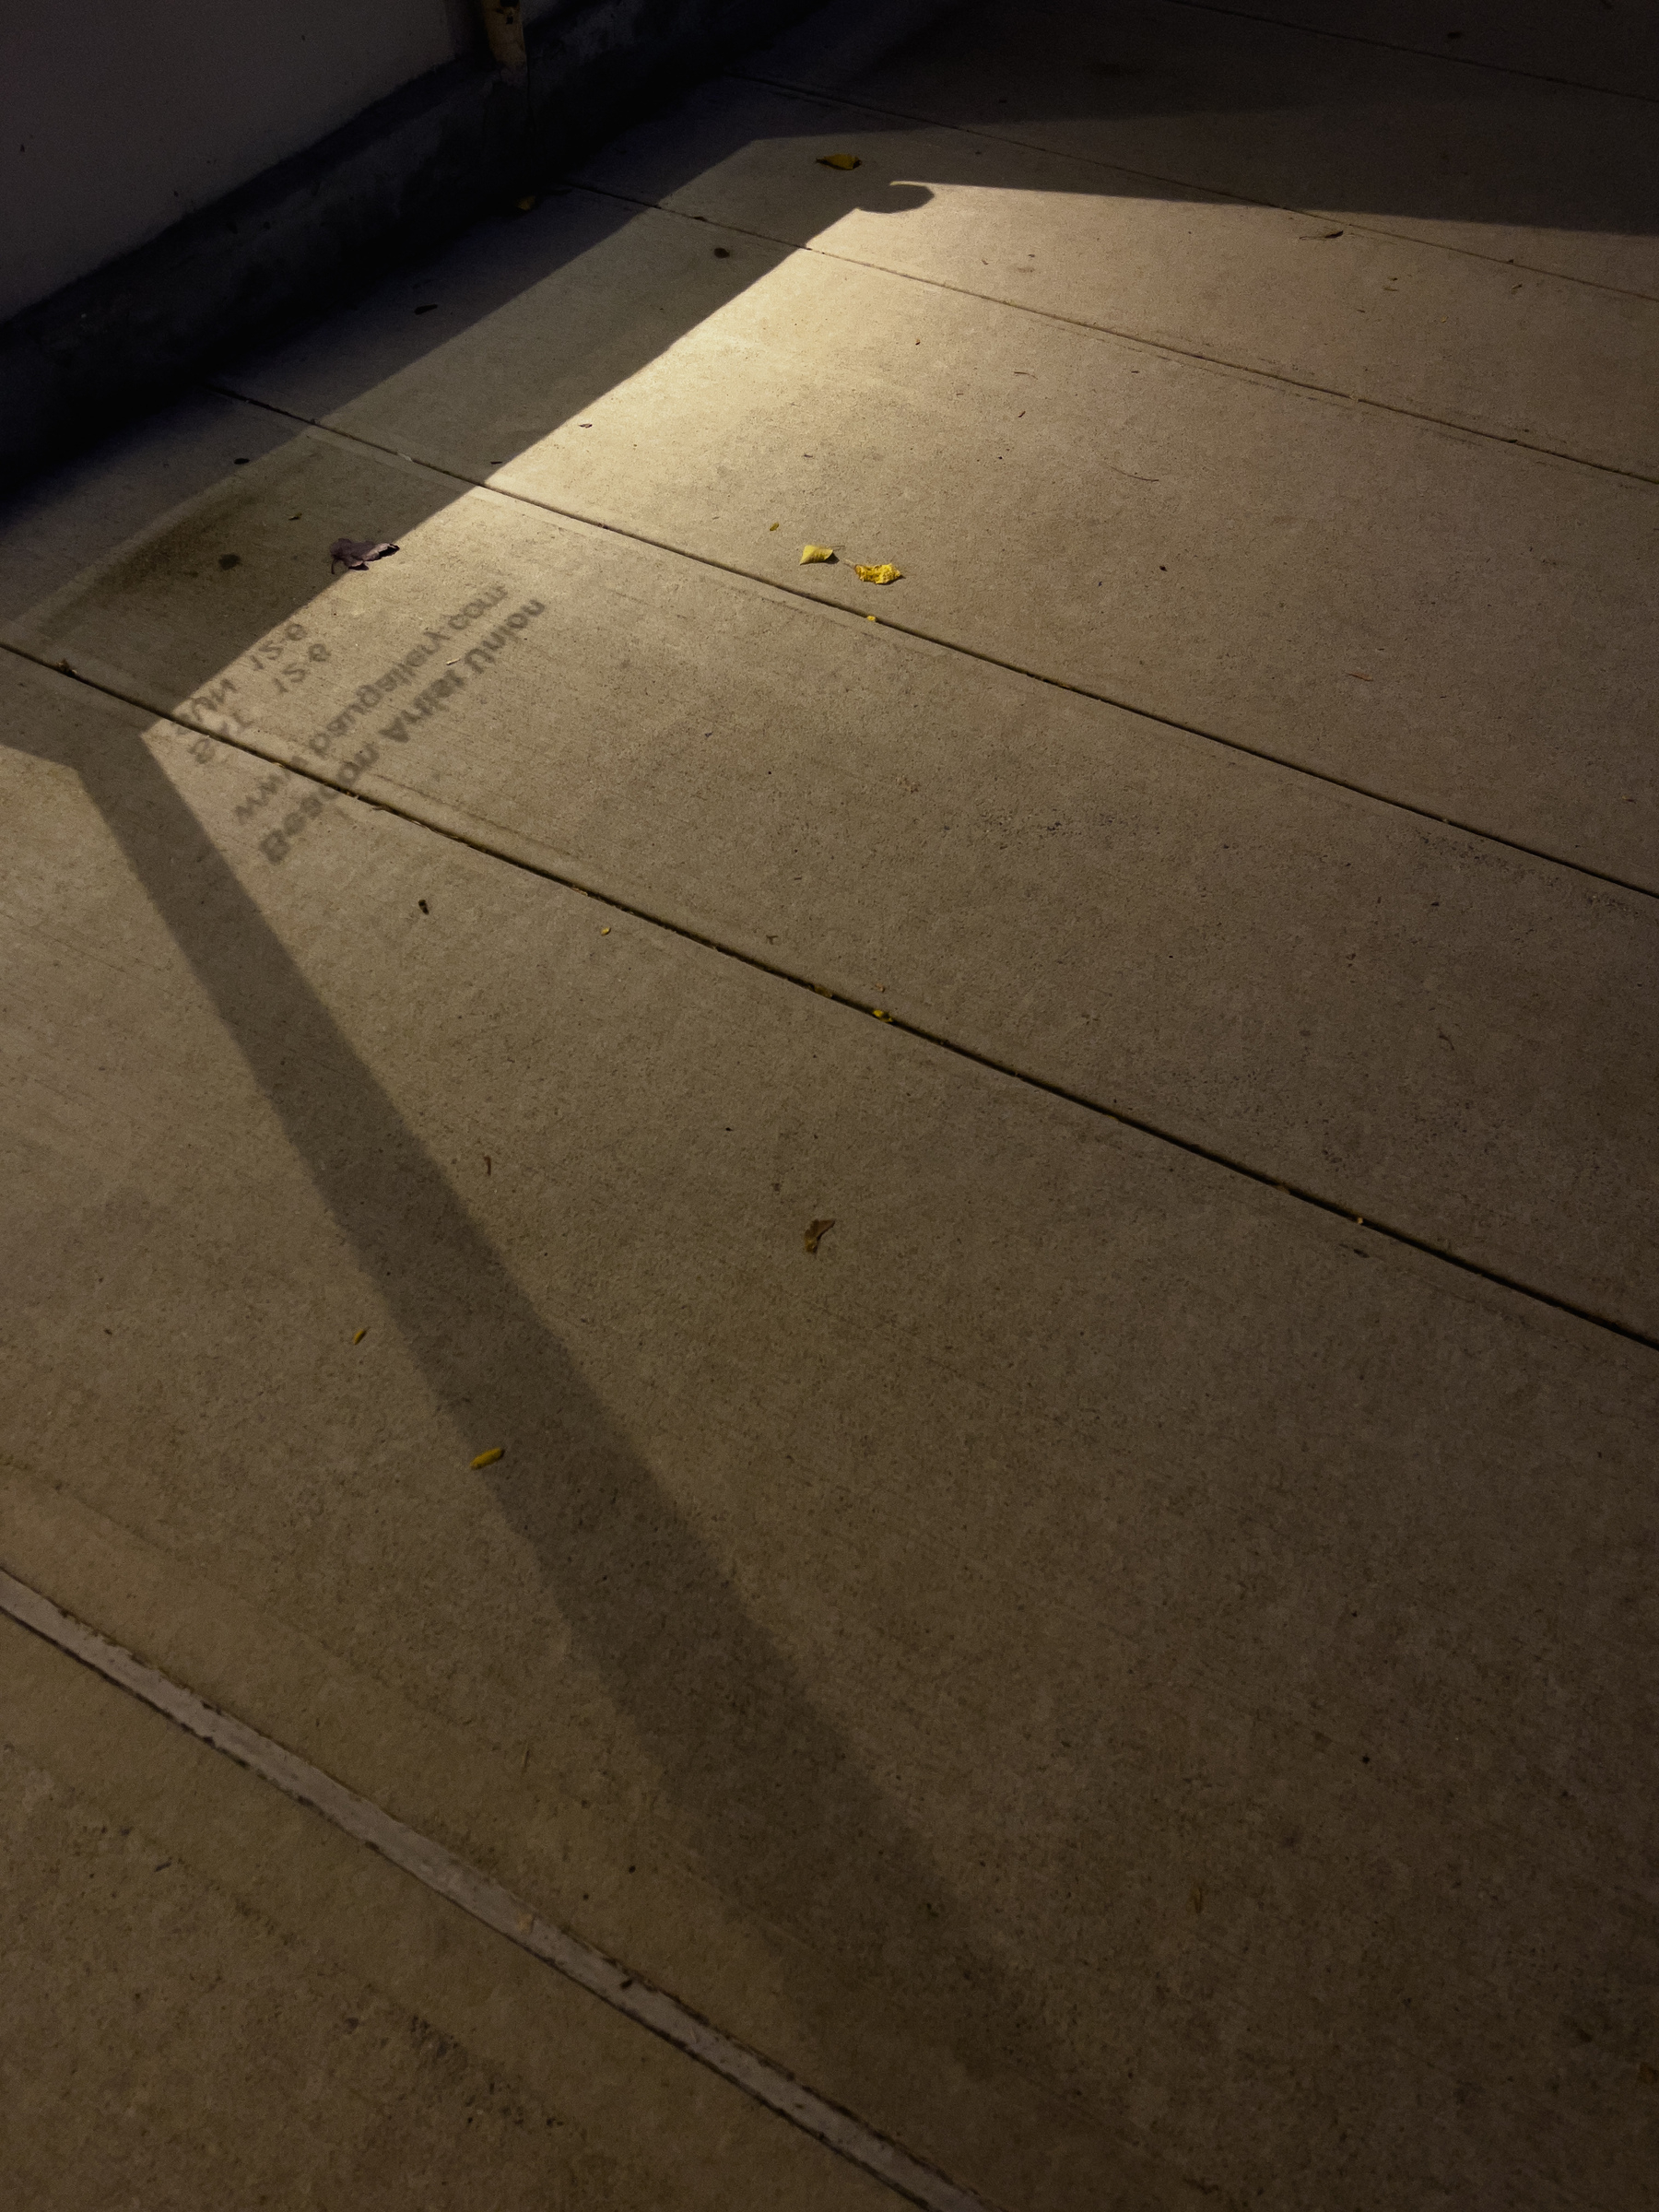 Light and shadow from storefront lighting on concrete sidewalk.